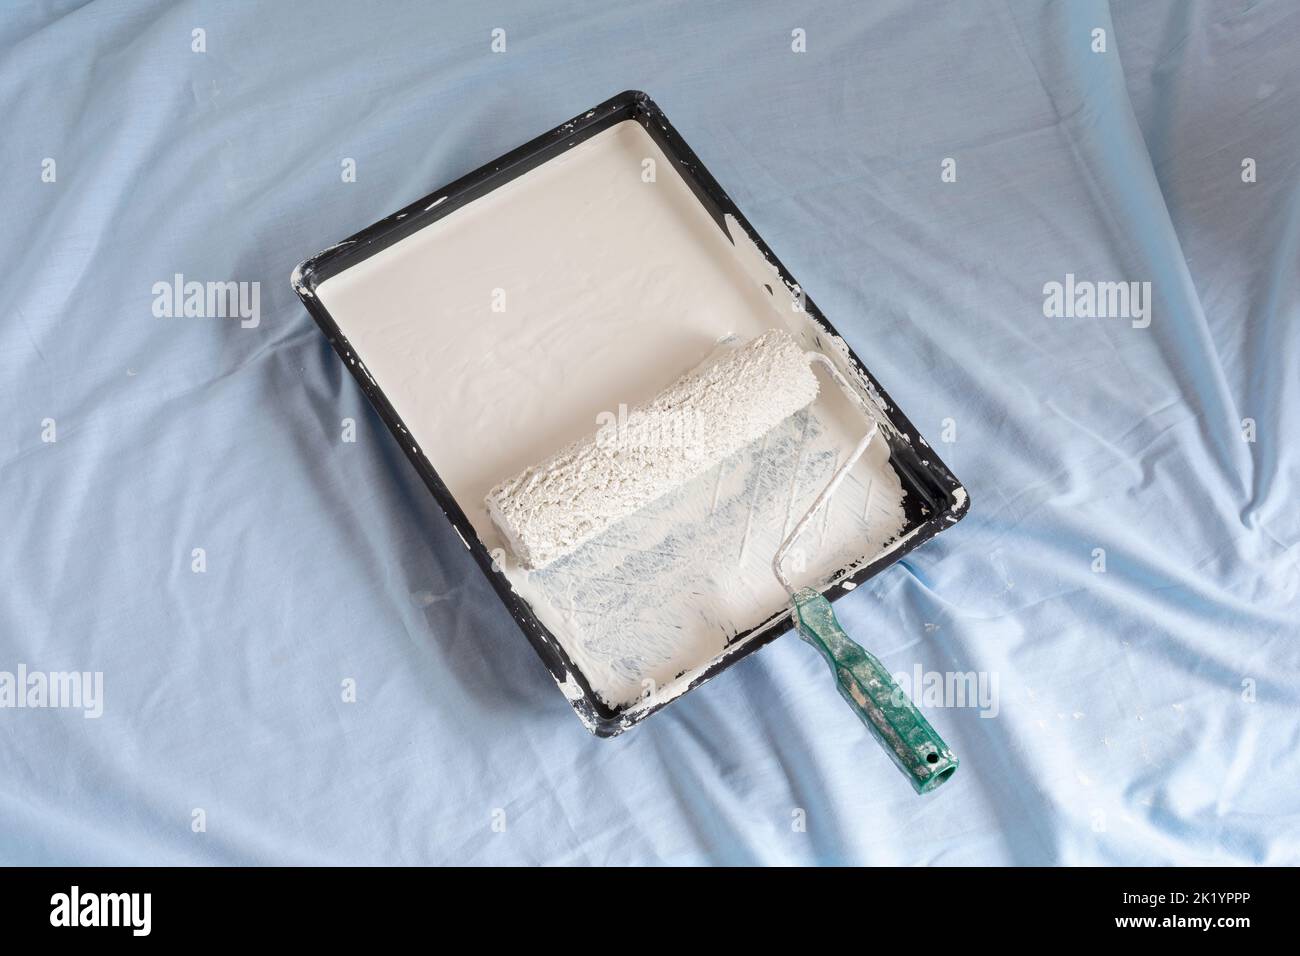 Paint tray ready to use with cream coloured paint and paint roller home decorating Stock Photo